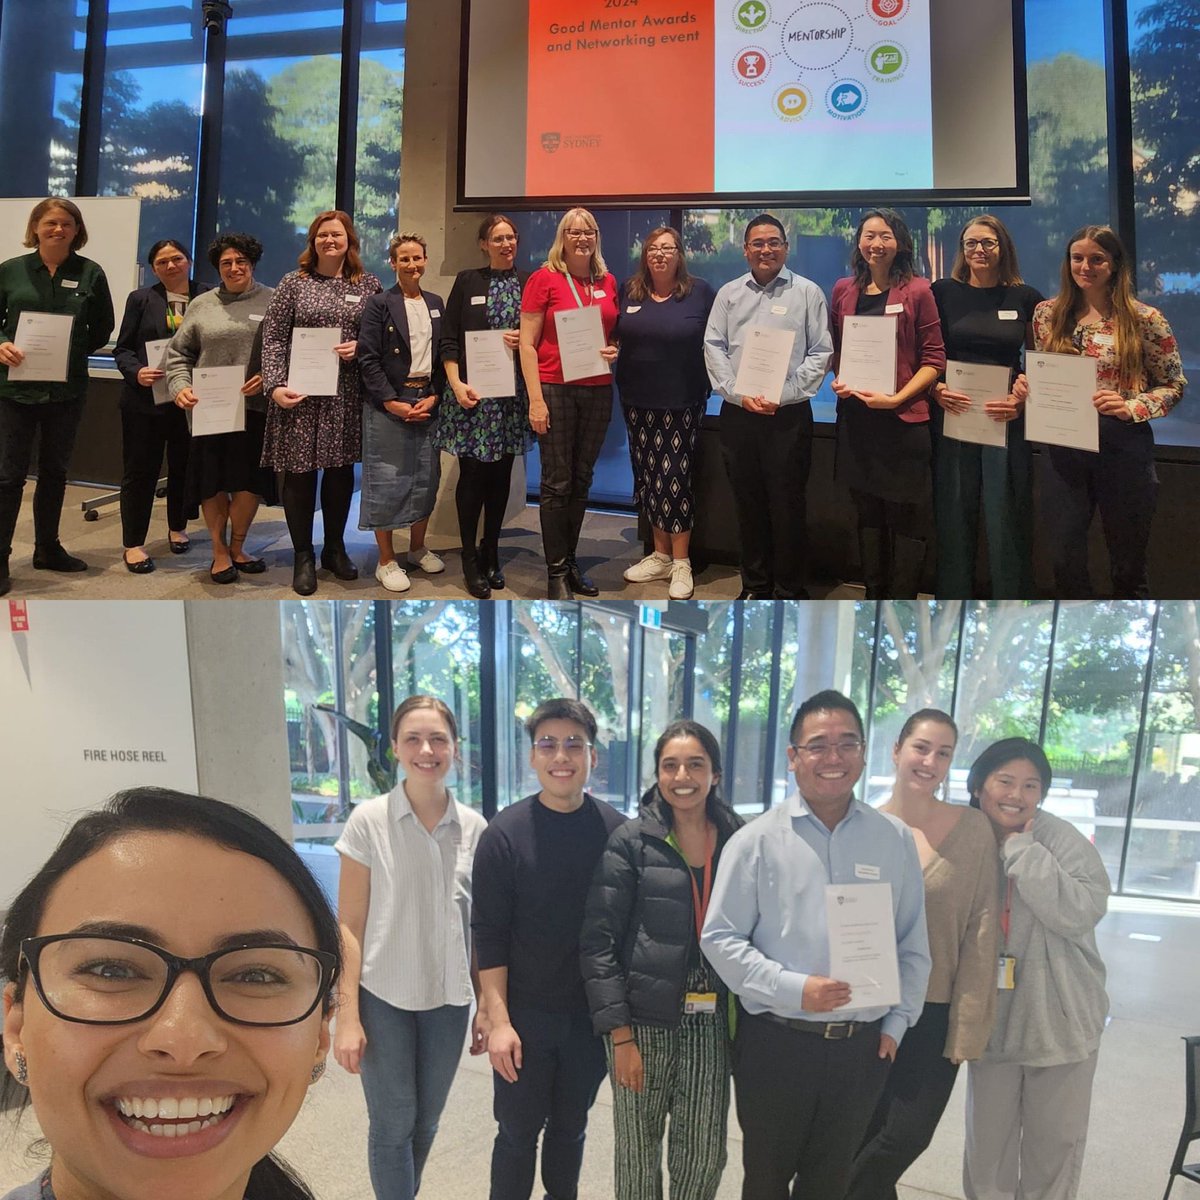 Thanks @Usyd_SEMCAN for awarding me the Good #Mentor Award 2024. I'm lucky to have an amazing team that inspire me @ShaniaLiu_ @cindasaur90 and Good Mentors to learn from @AndMacUSyd @sidpatan @RxProfPam @BurnsSyd @CathieSherr @Sydney_Uni